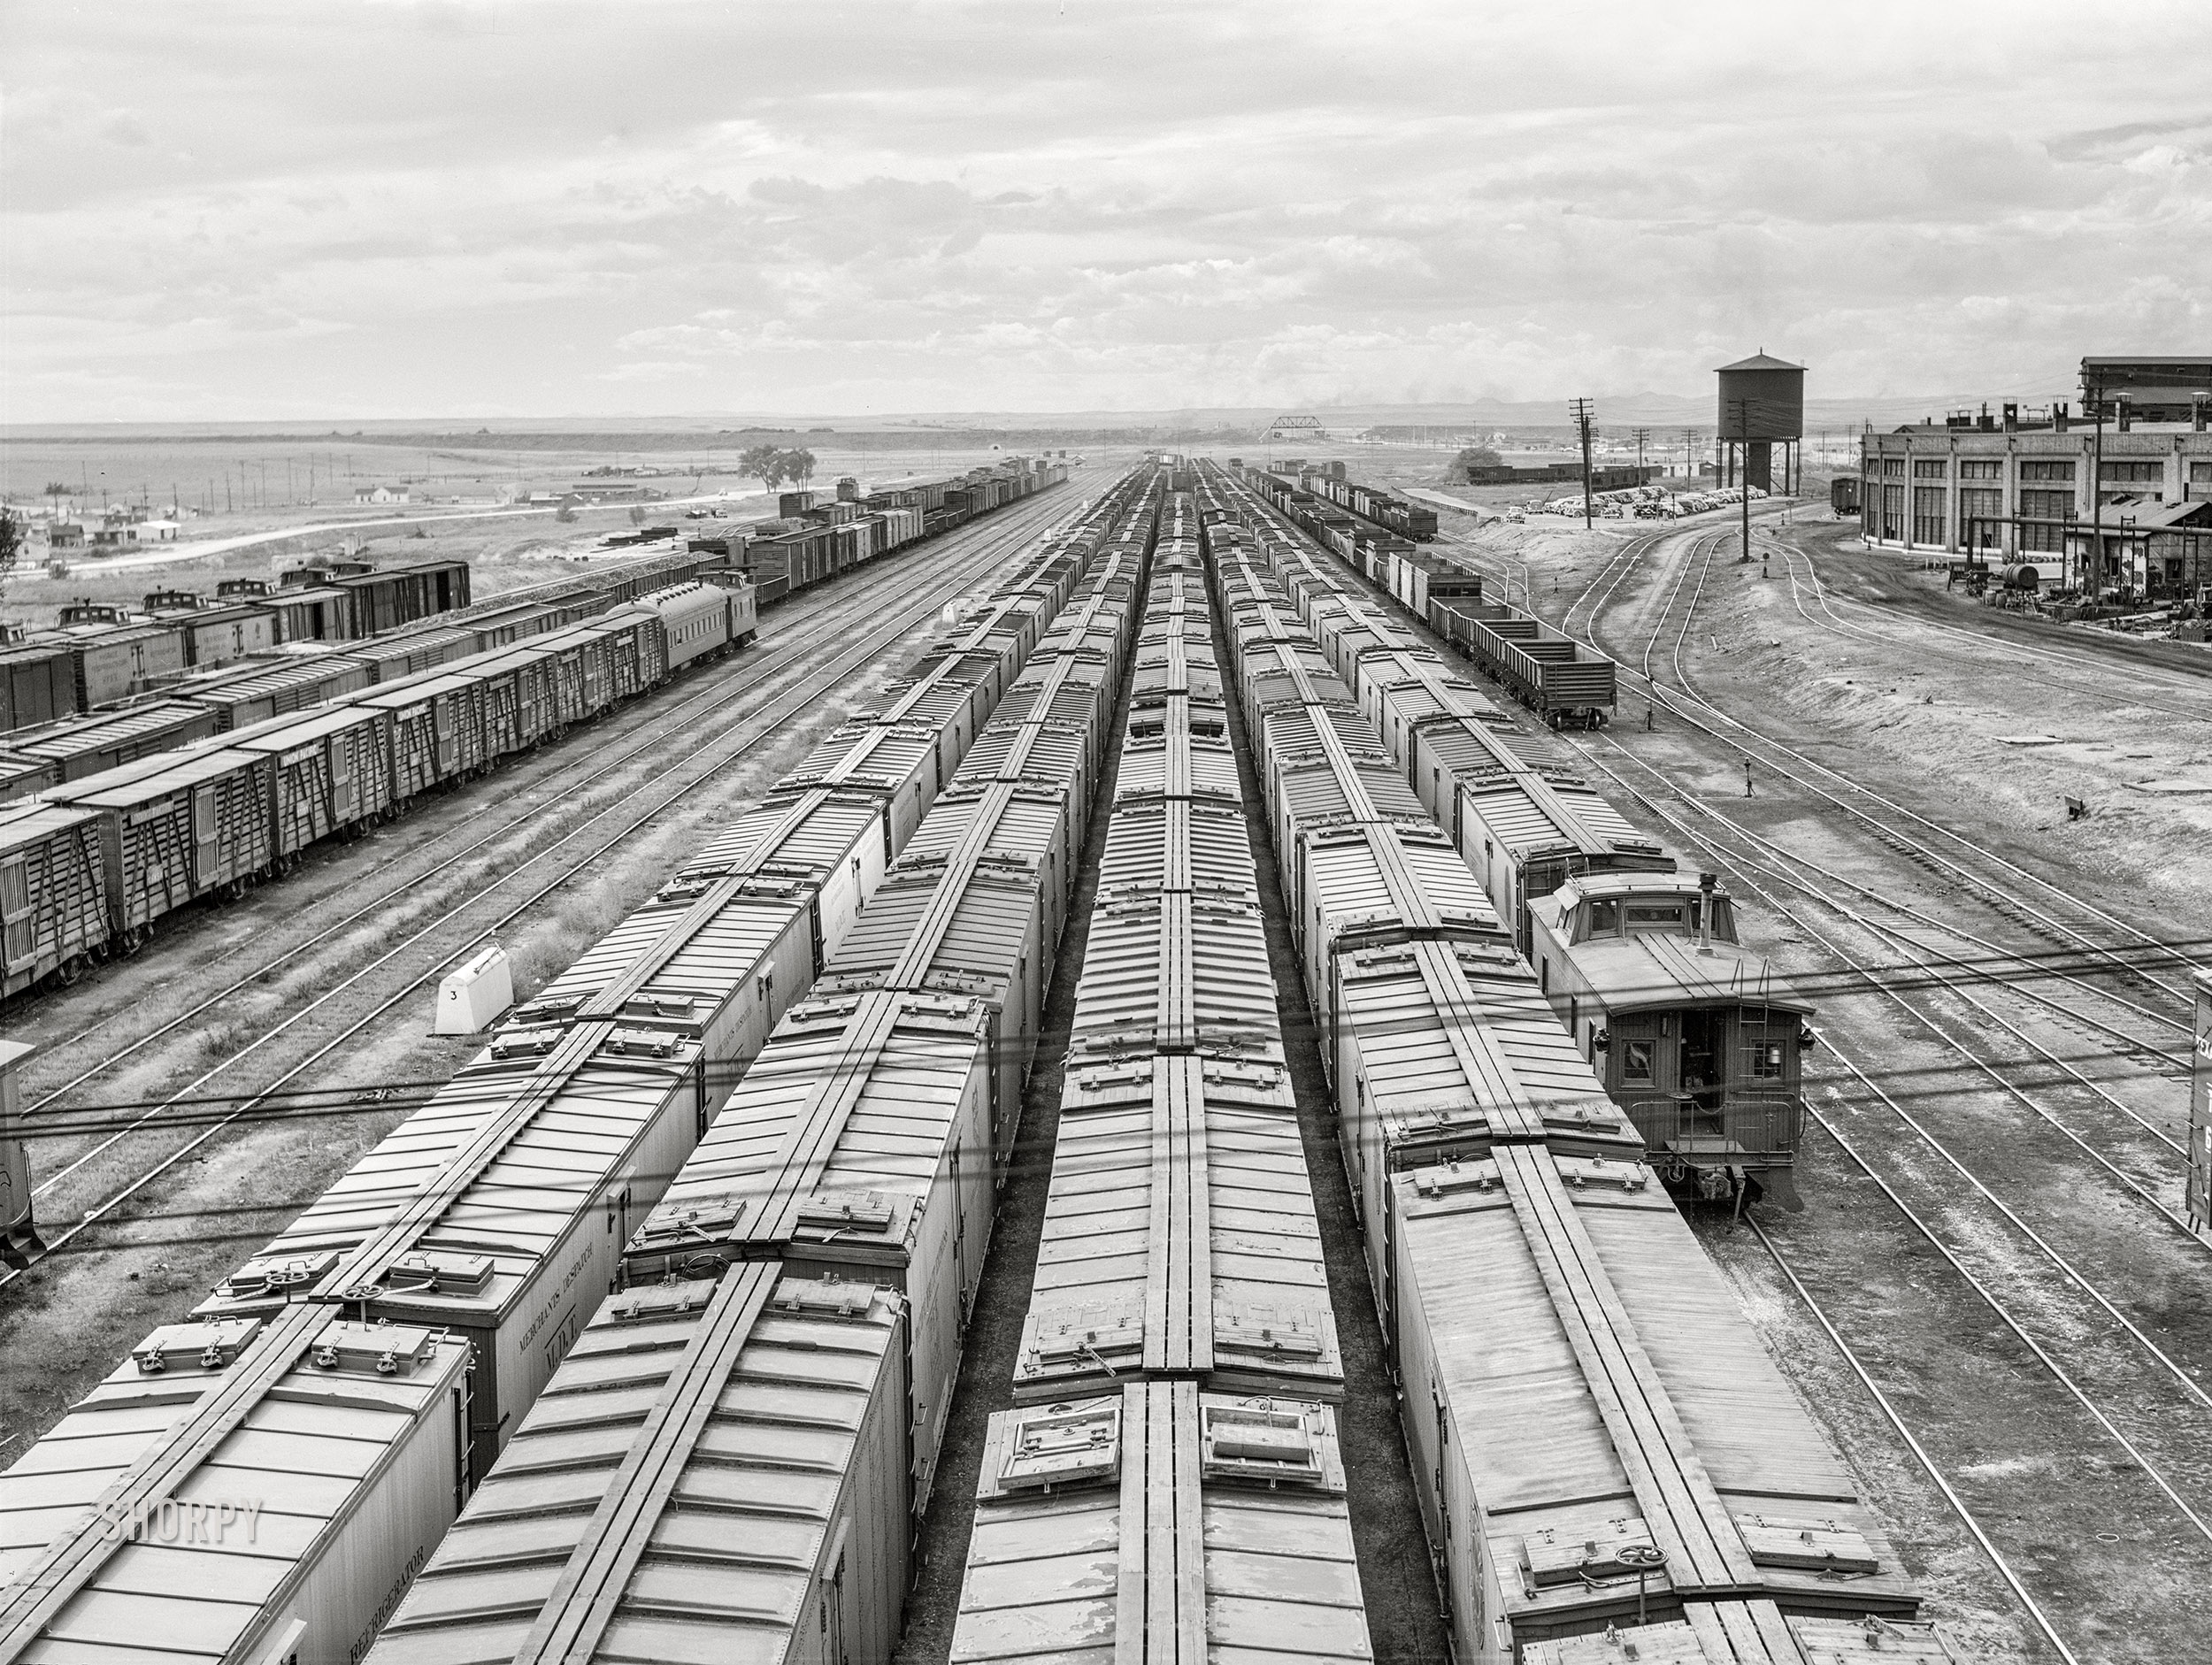 September 1941. "Freight trains in yards. Laramie, Wyoming." Medium format acetate negative by Marion Post Wolcott for the Farm Security Administration. View full size.